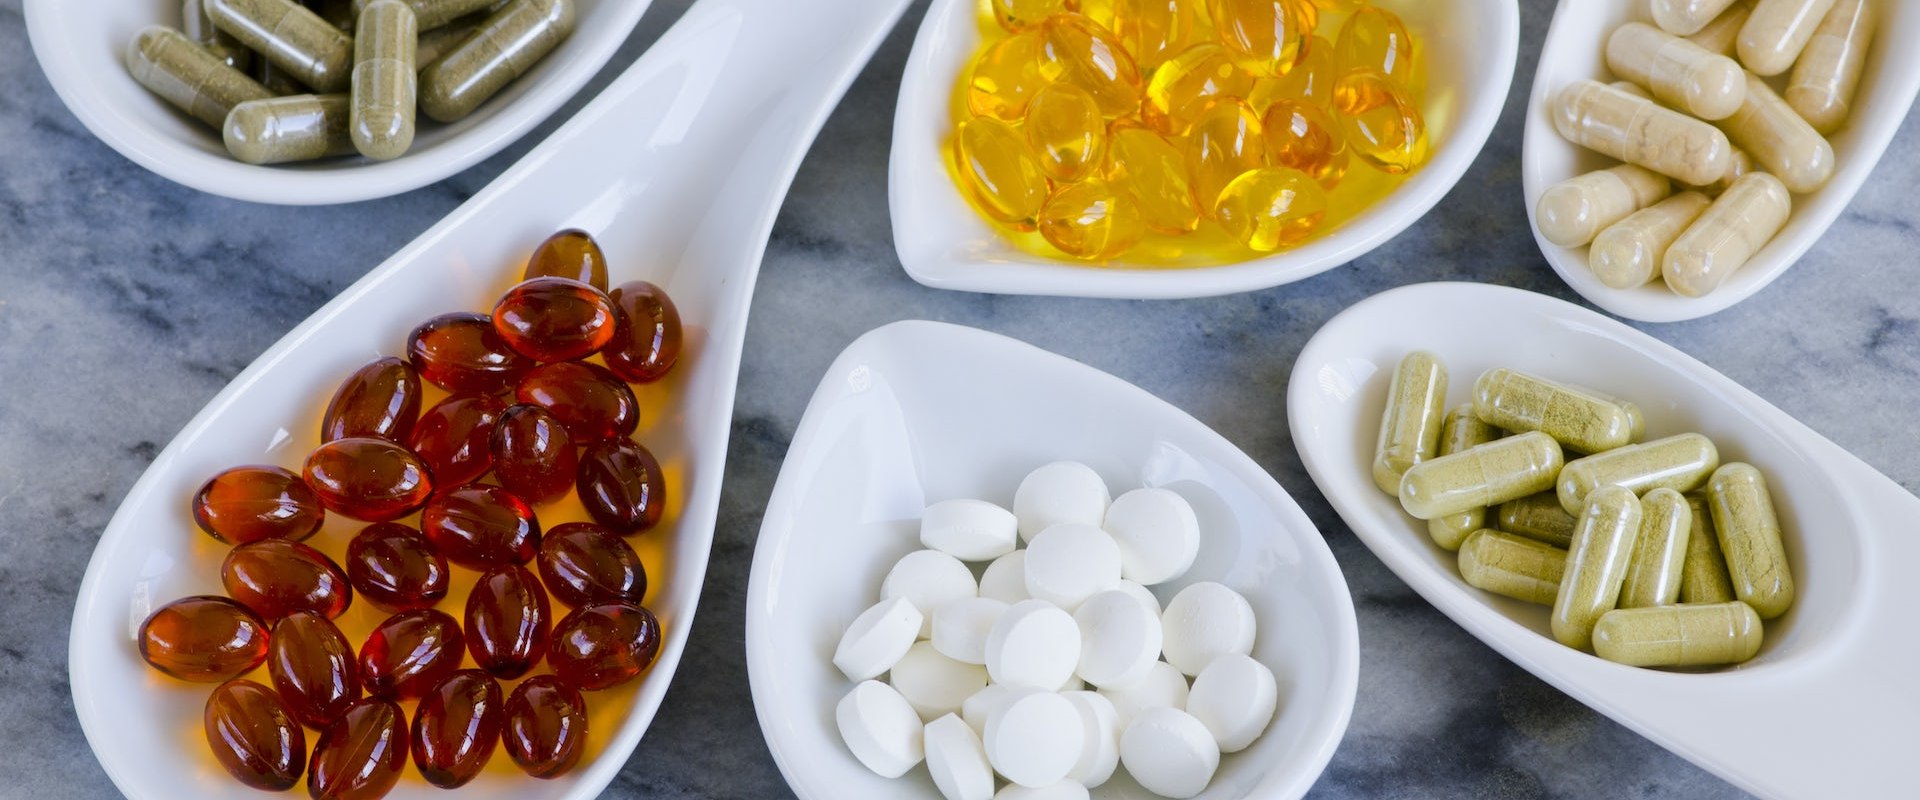 Are Nutritional Supplements Safe for Long-Term Use?